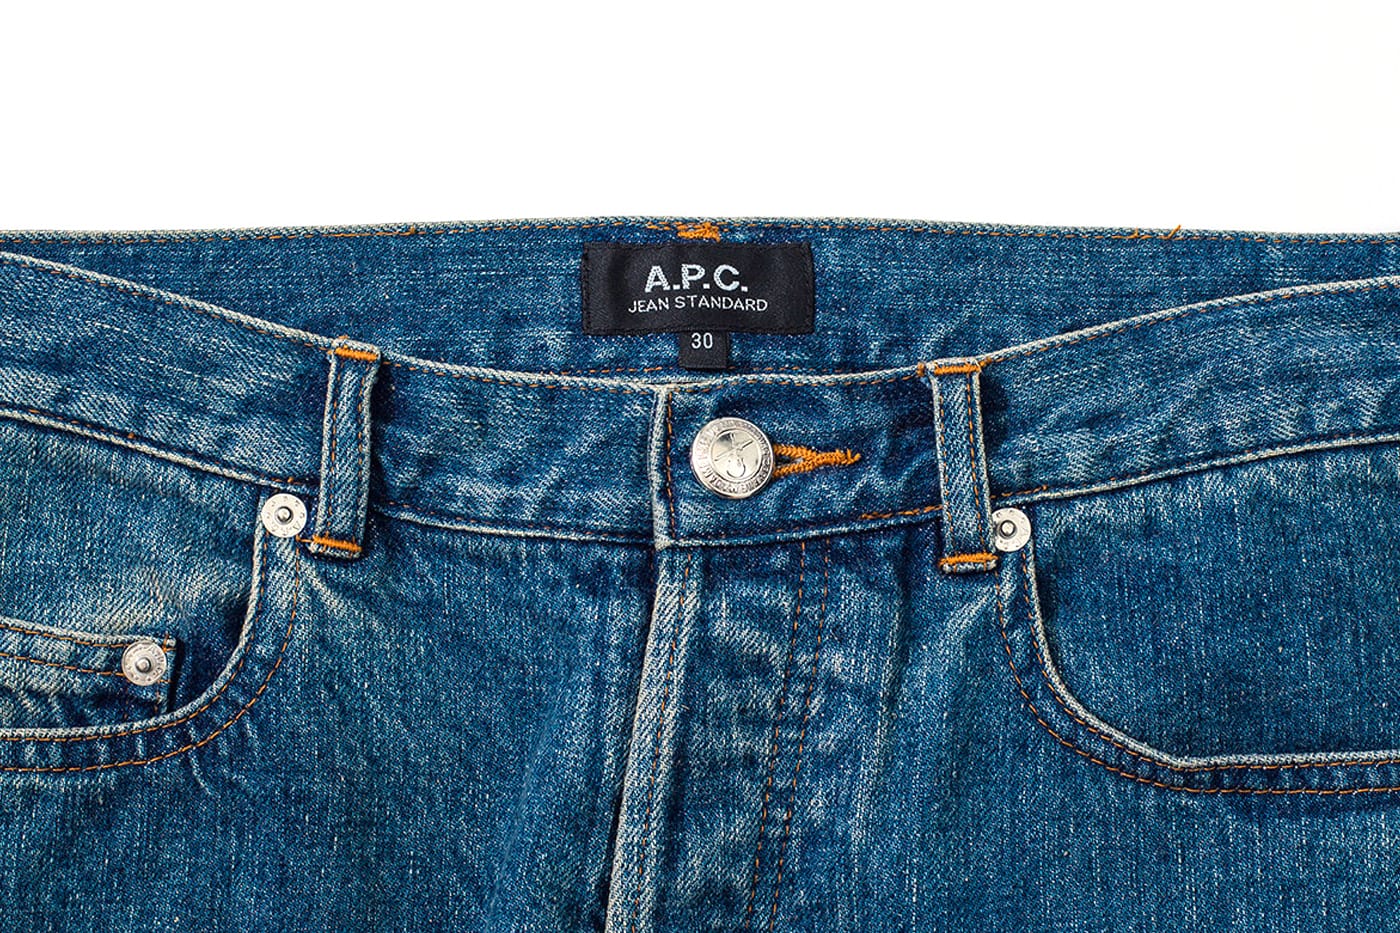 A.P.C. for Ron Herman JEAN STANDARD Release | Hypebeast